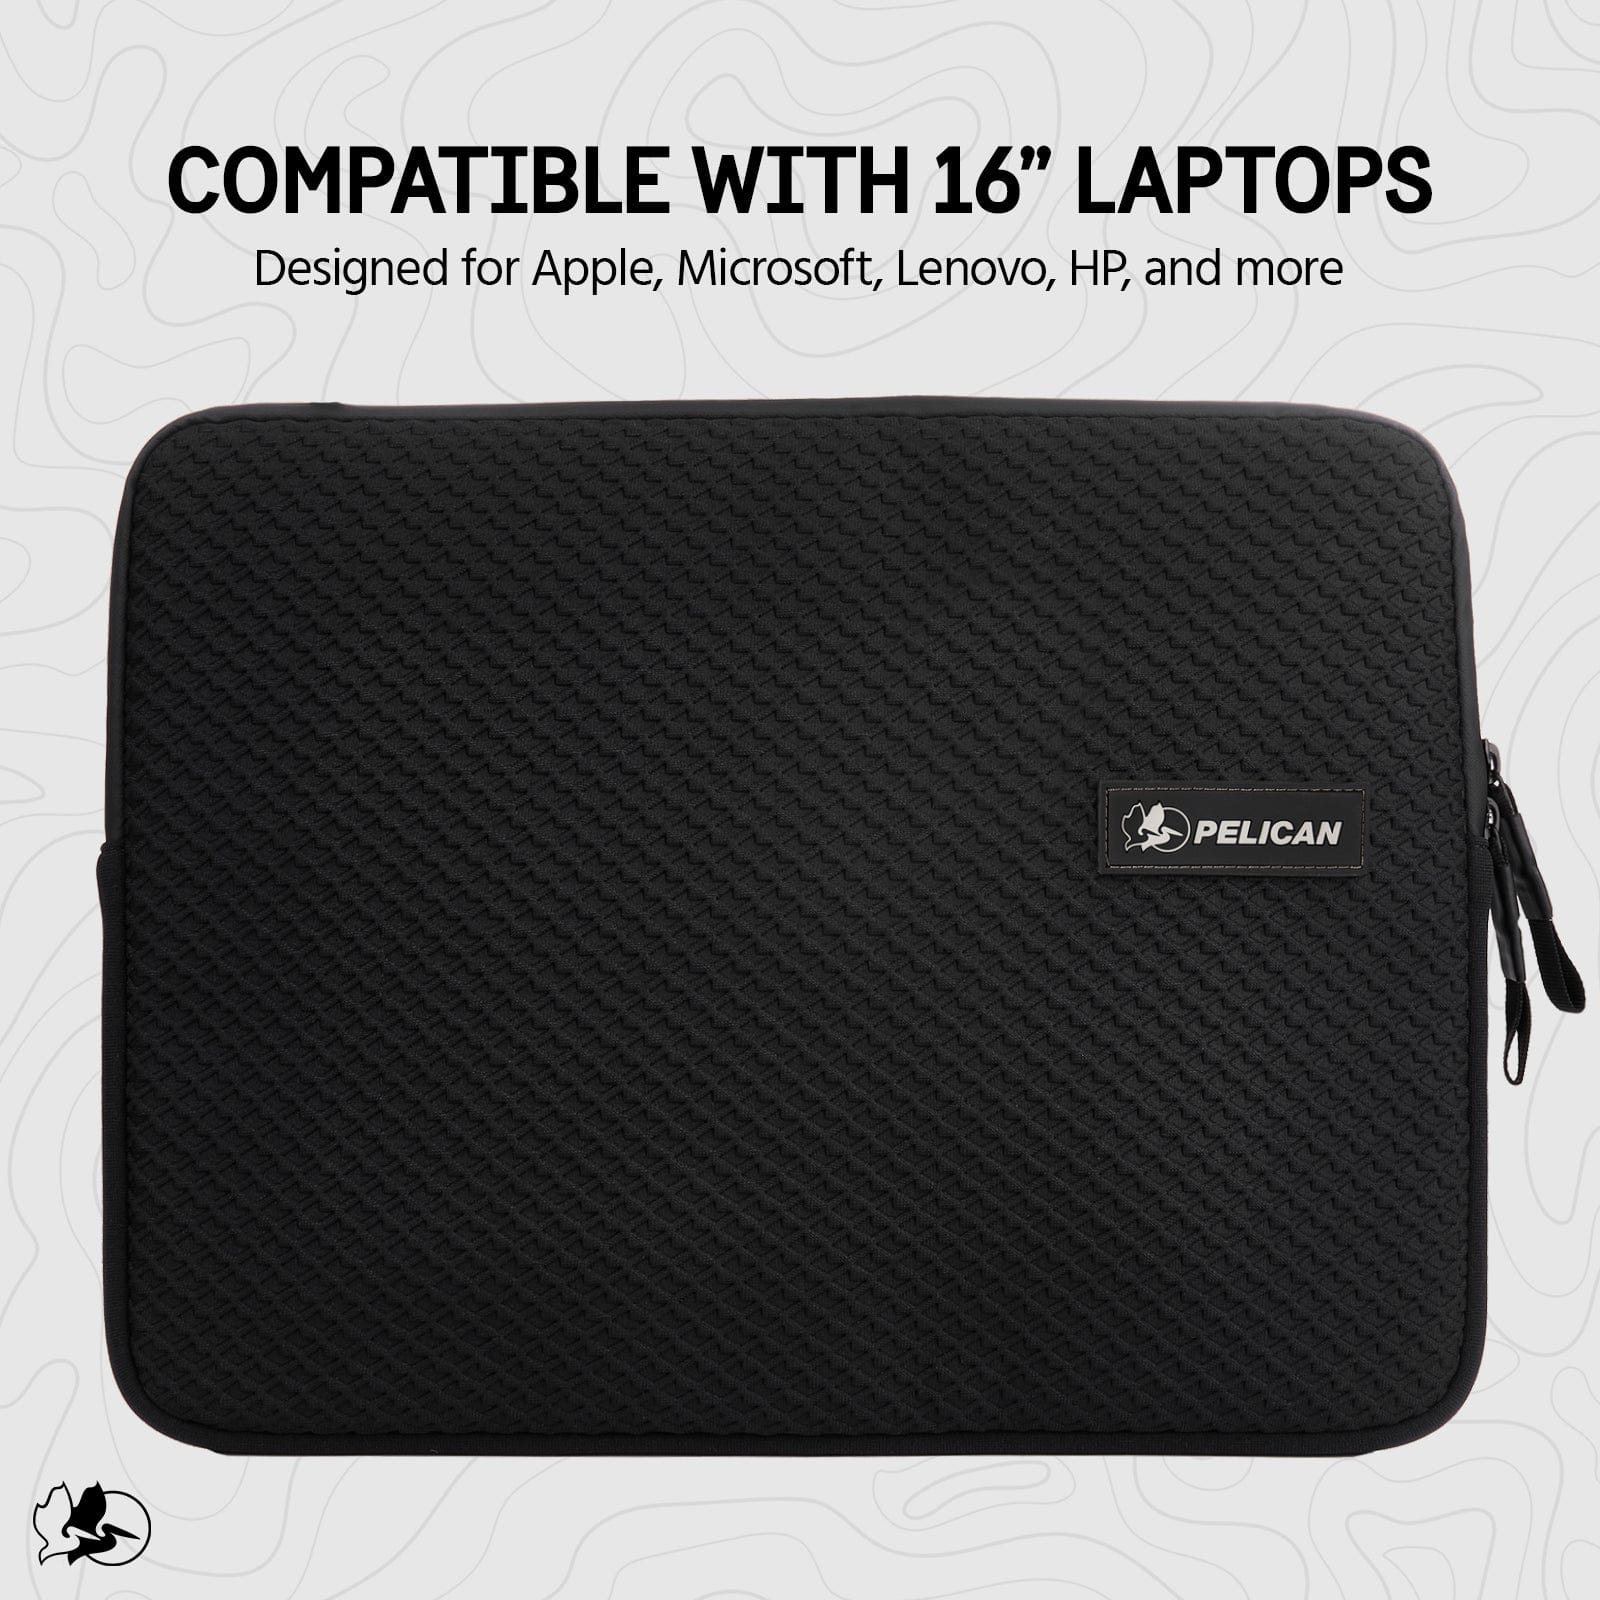 COMPATIBLE WITH 16" LAPTOPS